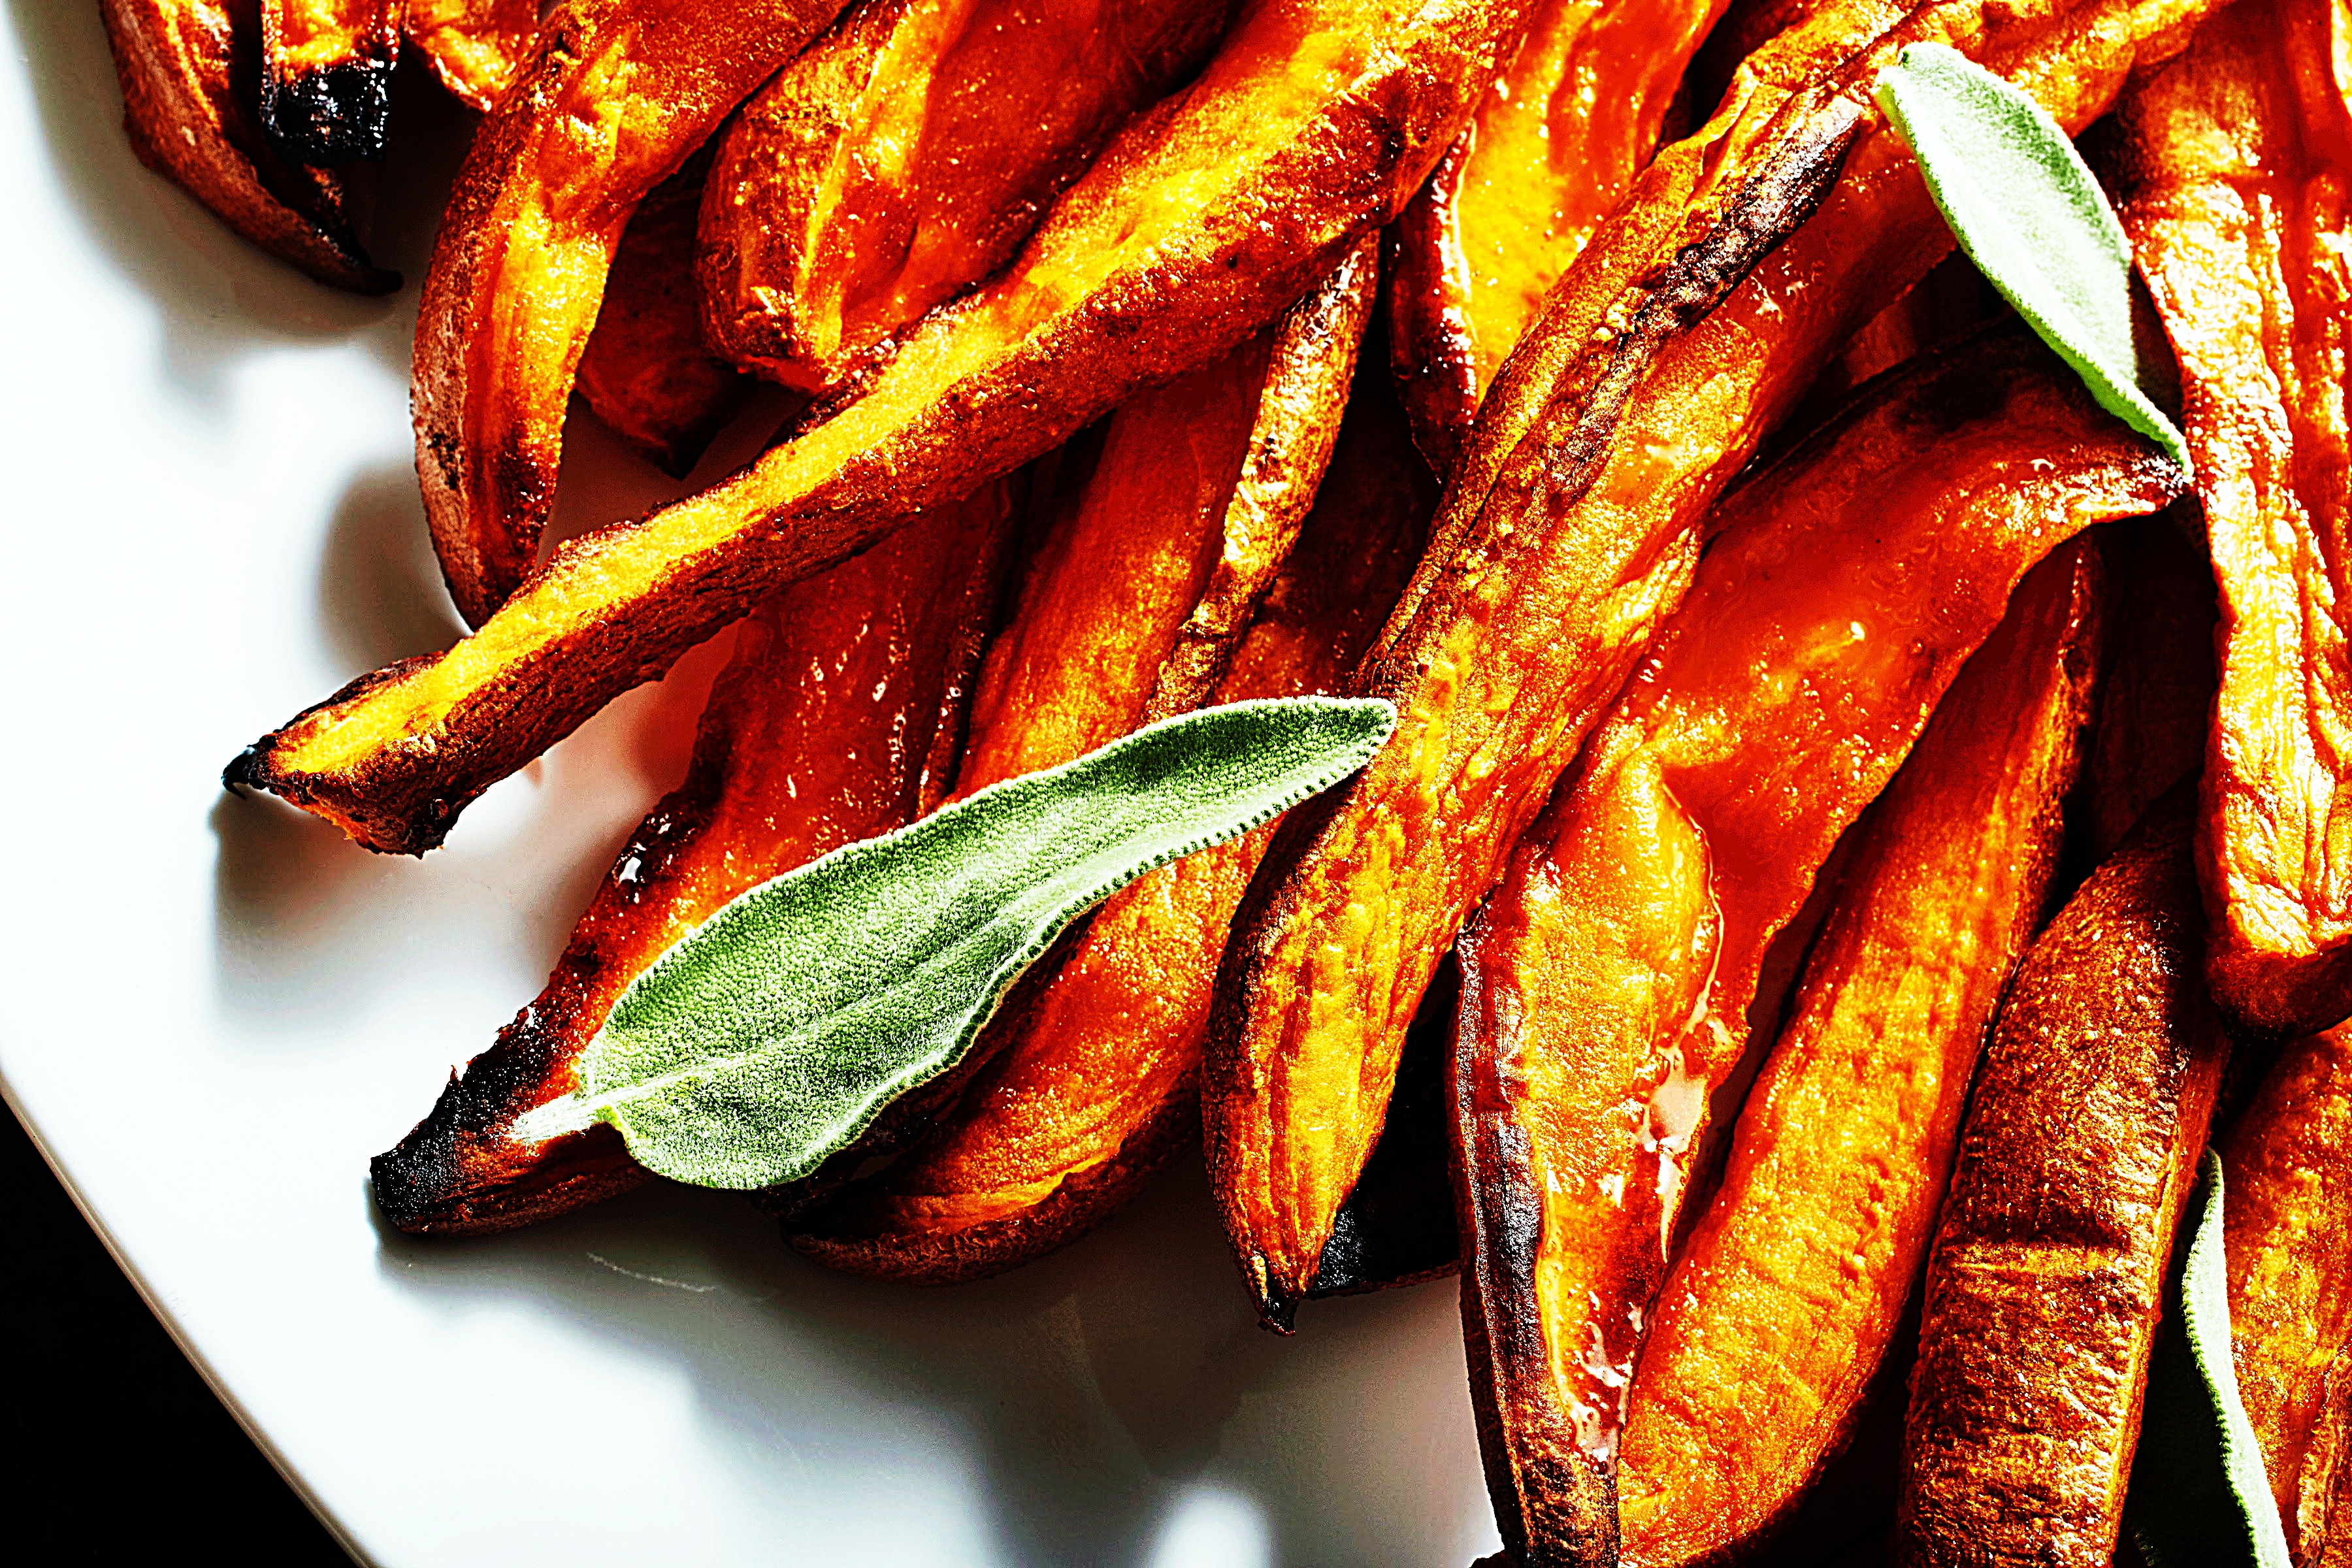 Stupid-Easy Recipe for Honey and Brown Sugar Sweet Potatoes (#1 Top-Rated)